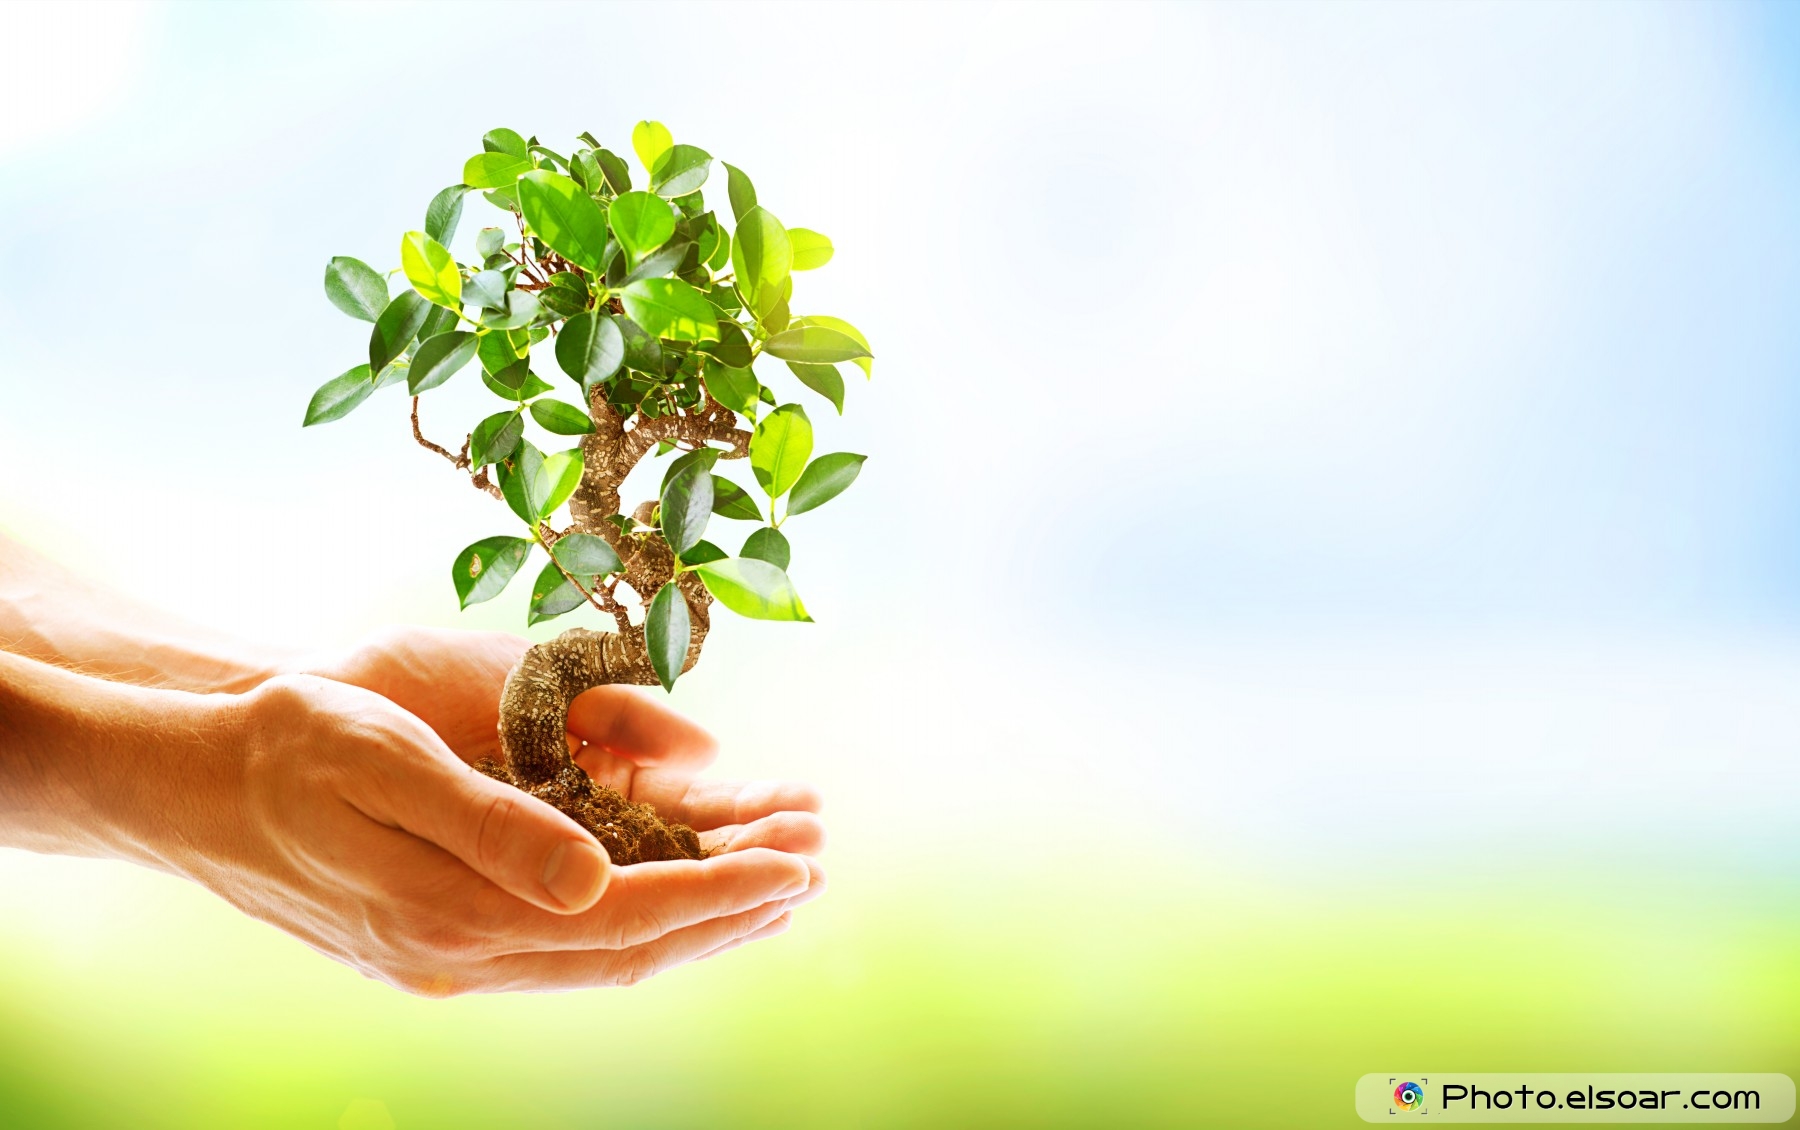 Human Hands Holding Green Plant - Plant In Hand - HD Wallpaper 